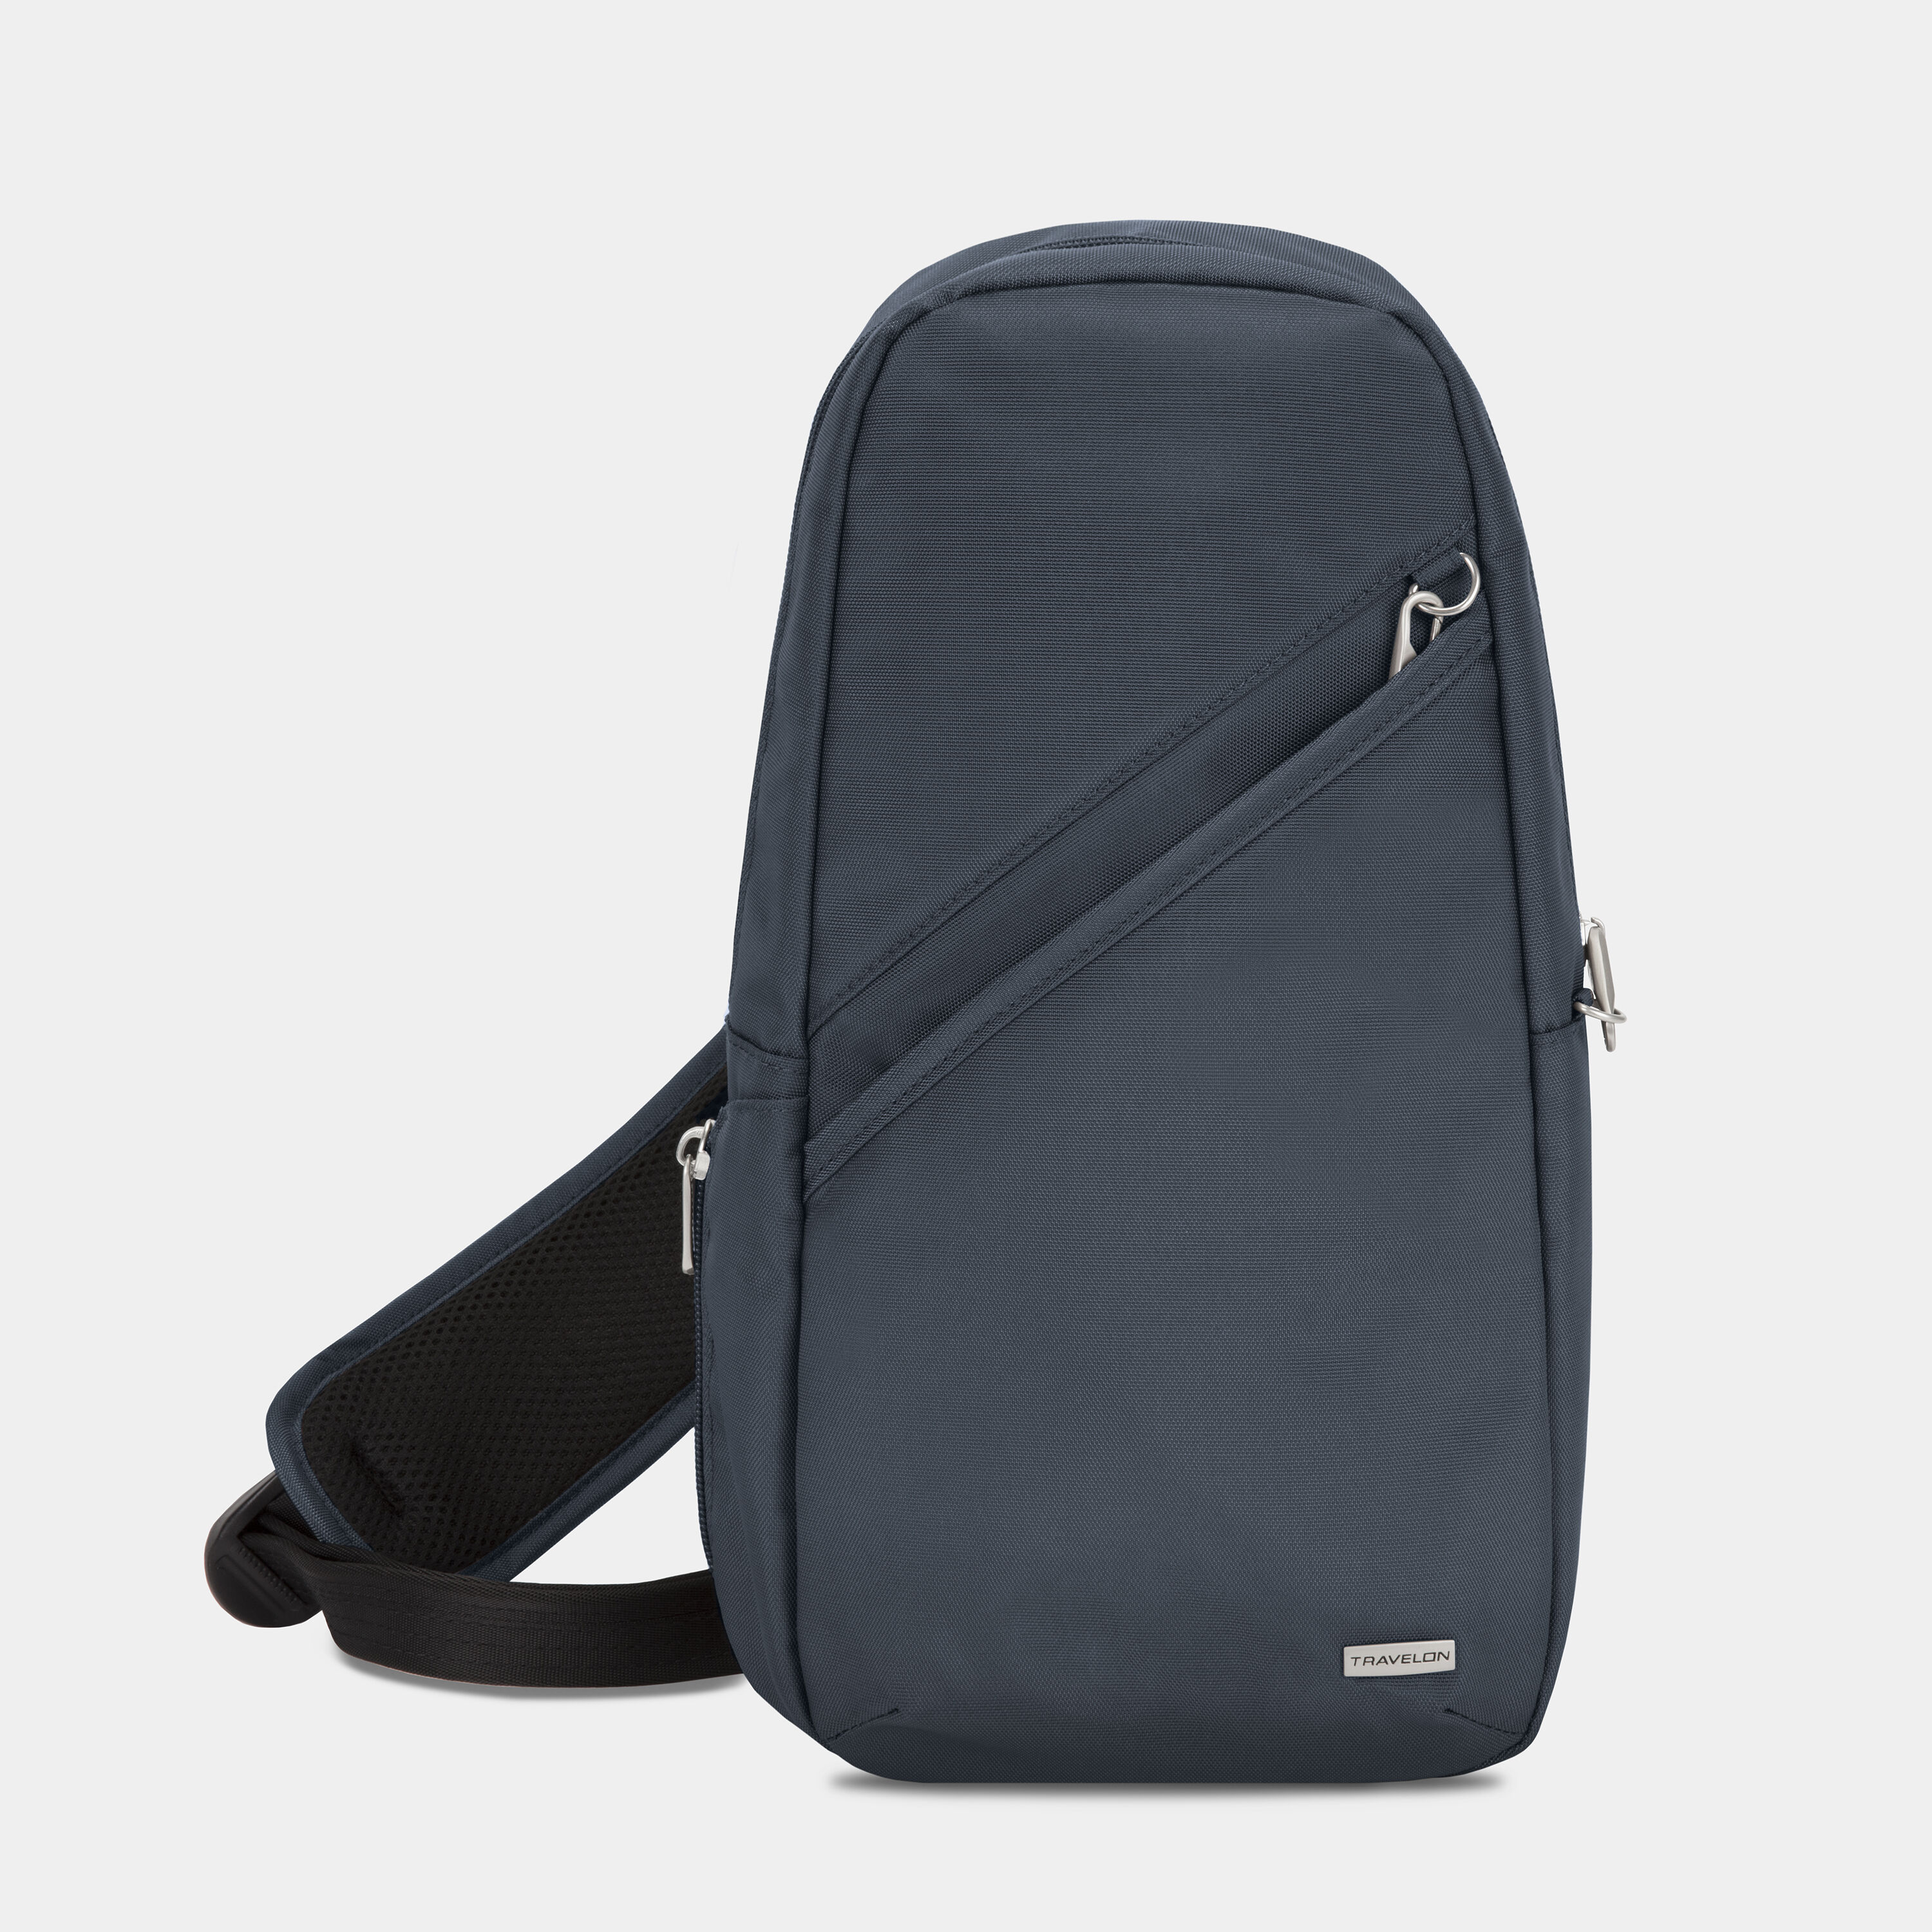 Musette Sling Bag - Simple and Durable: 4.2L | Road Runner Bags